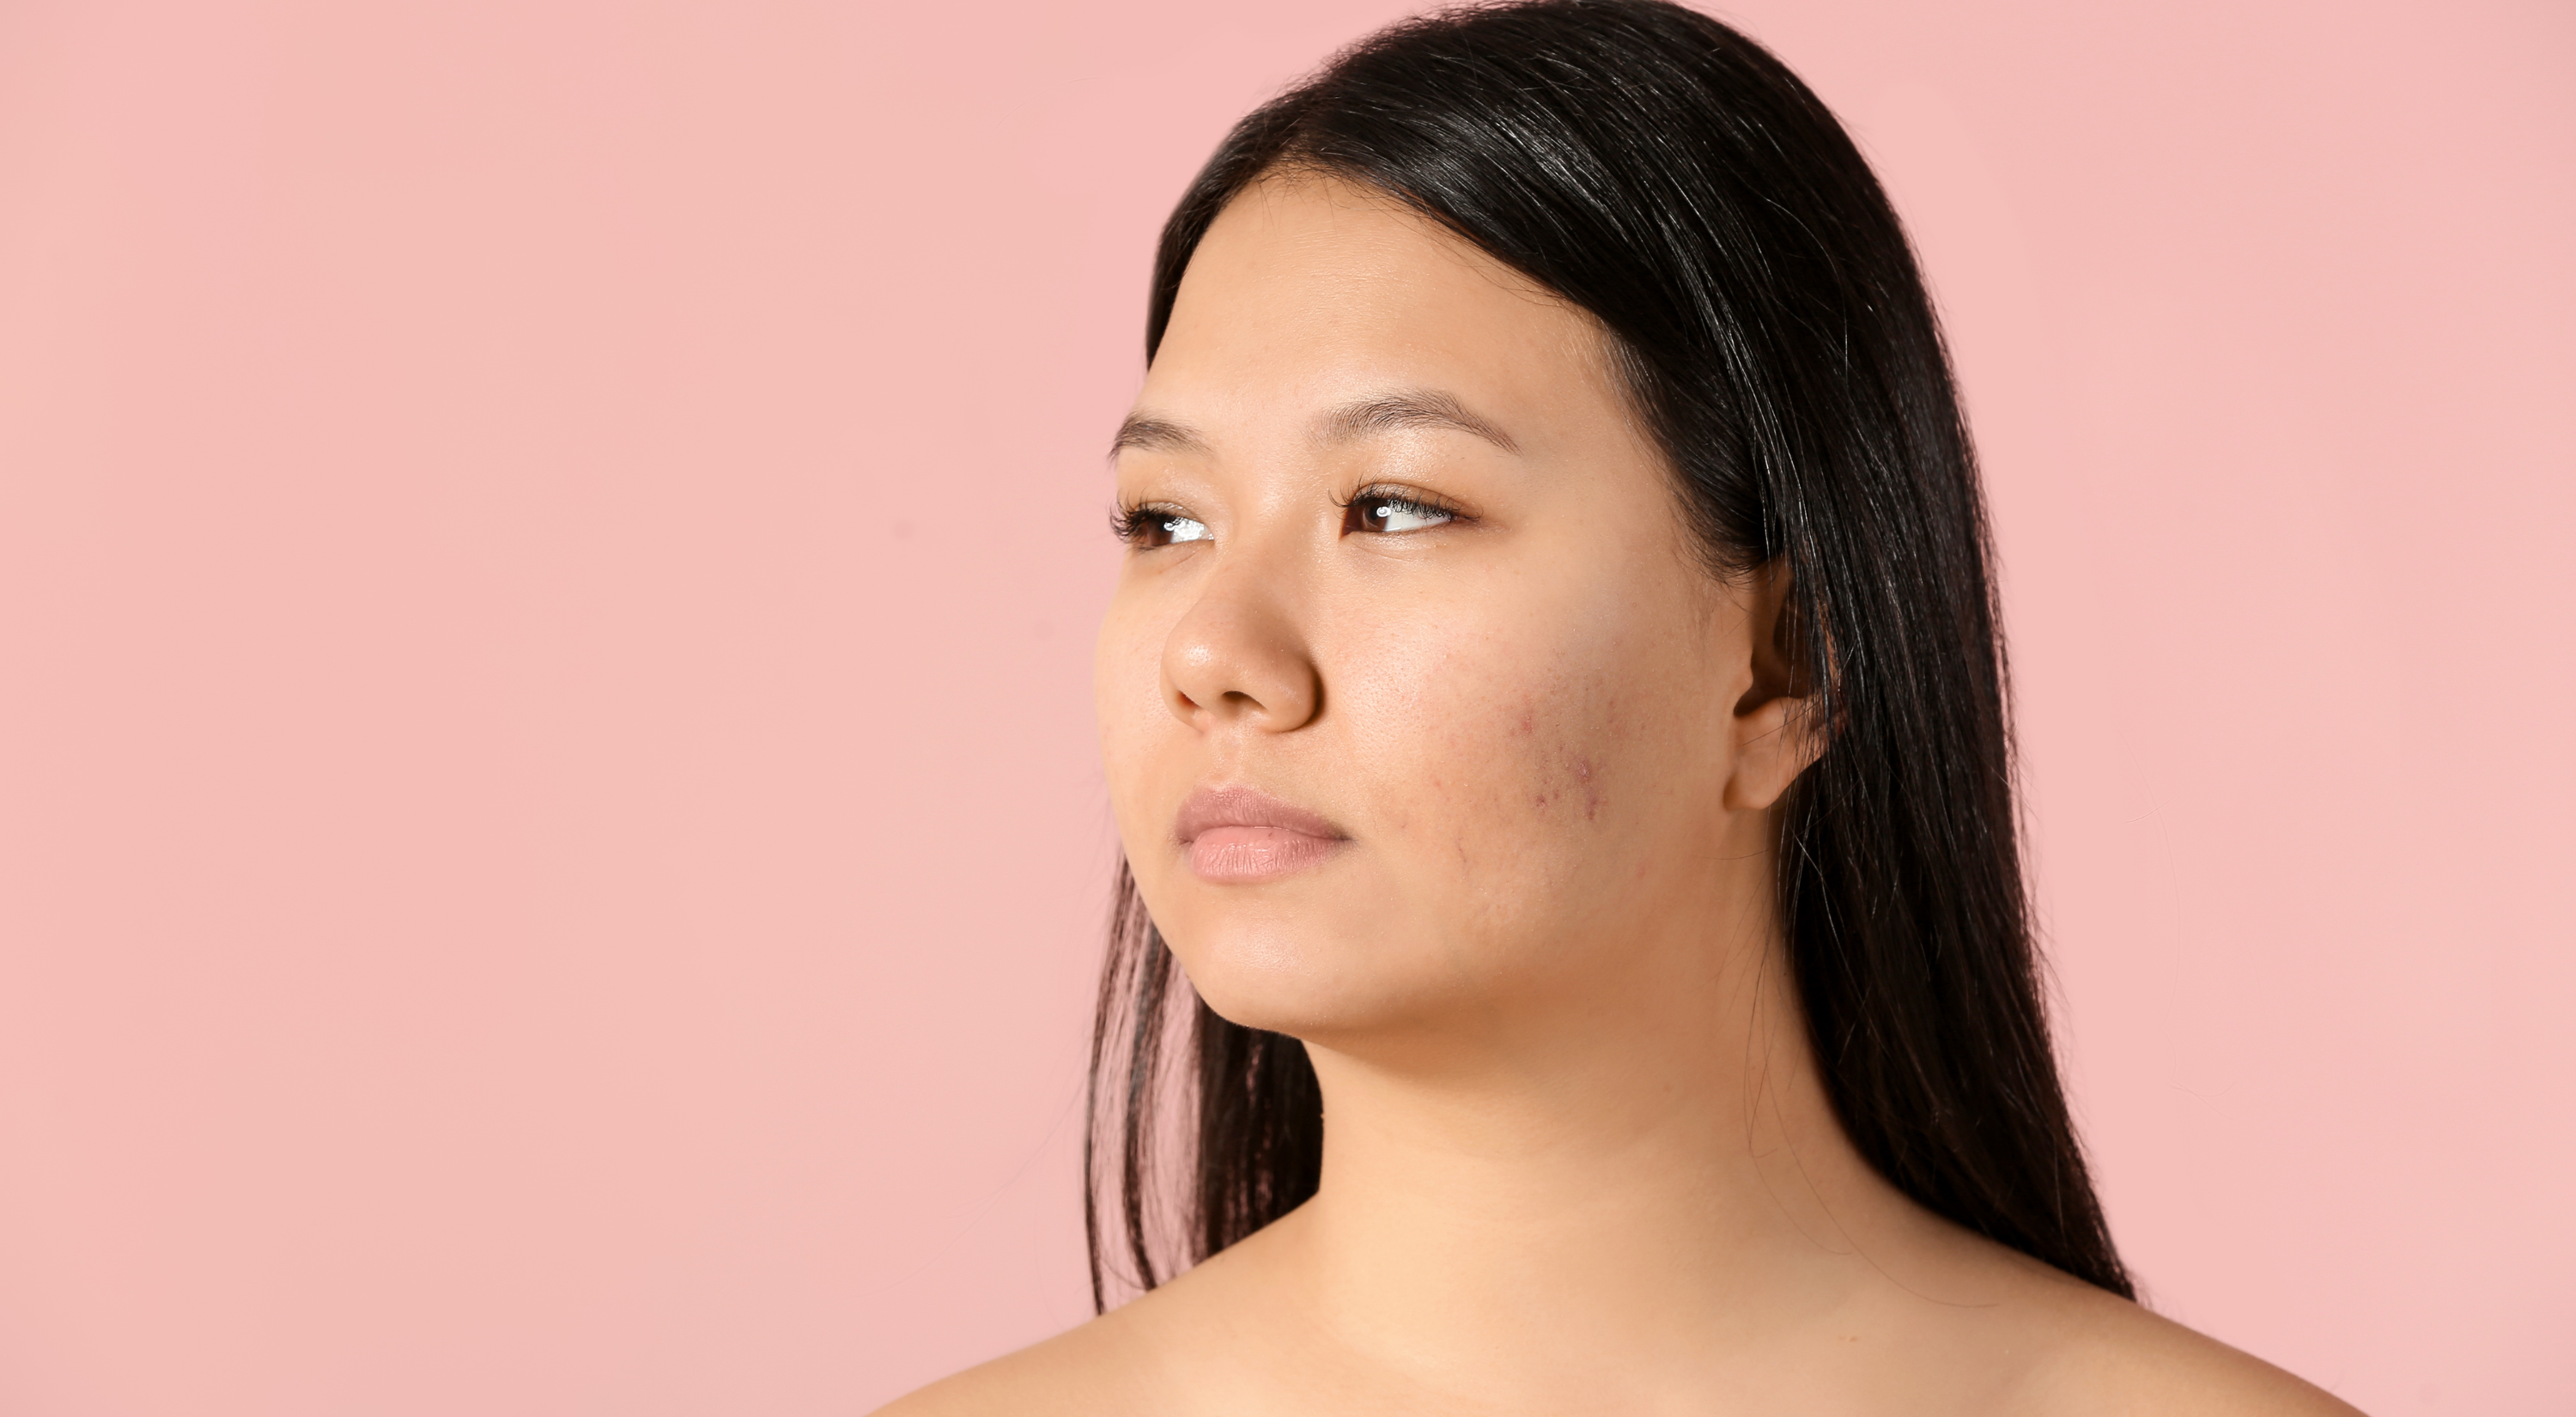 Acne & Constipation: Are They Linked?